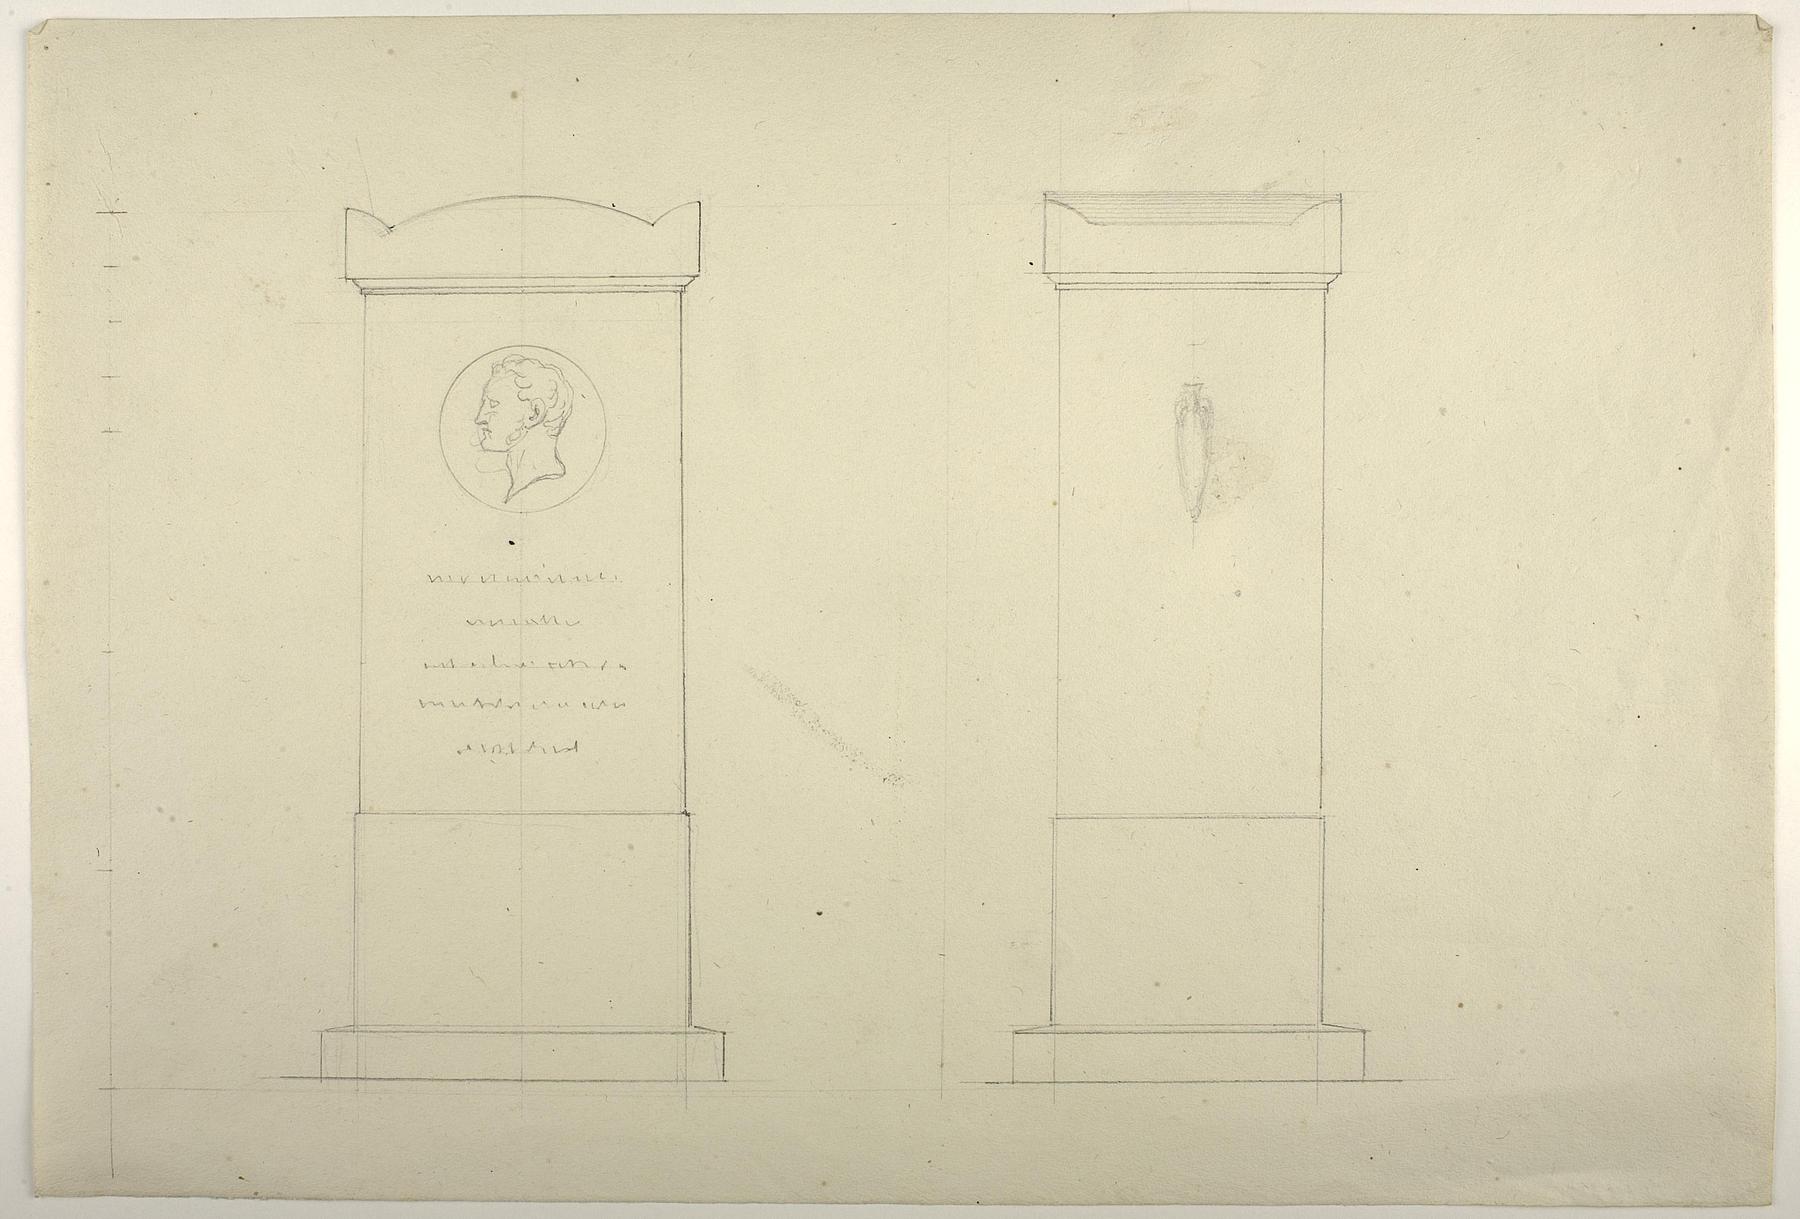 Tombstone to August von Goethe, elevations, D1575